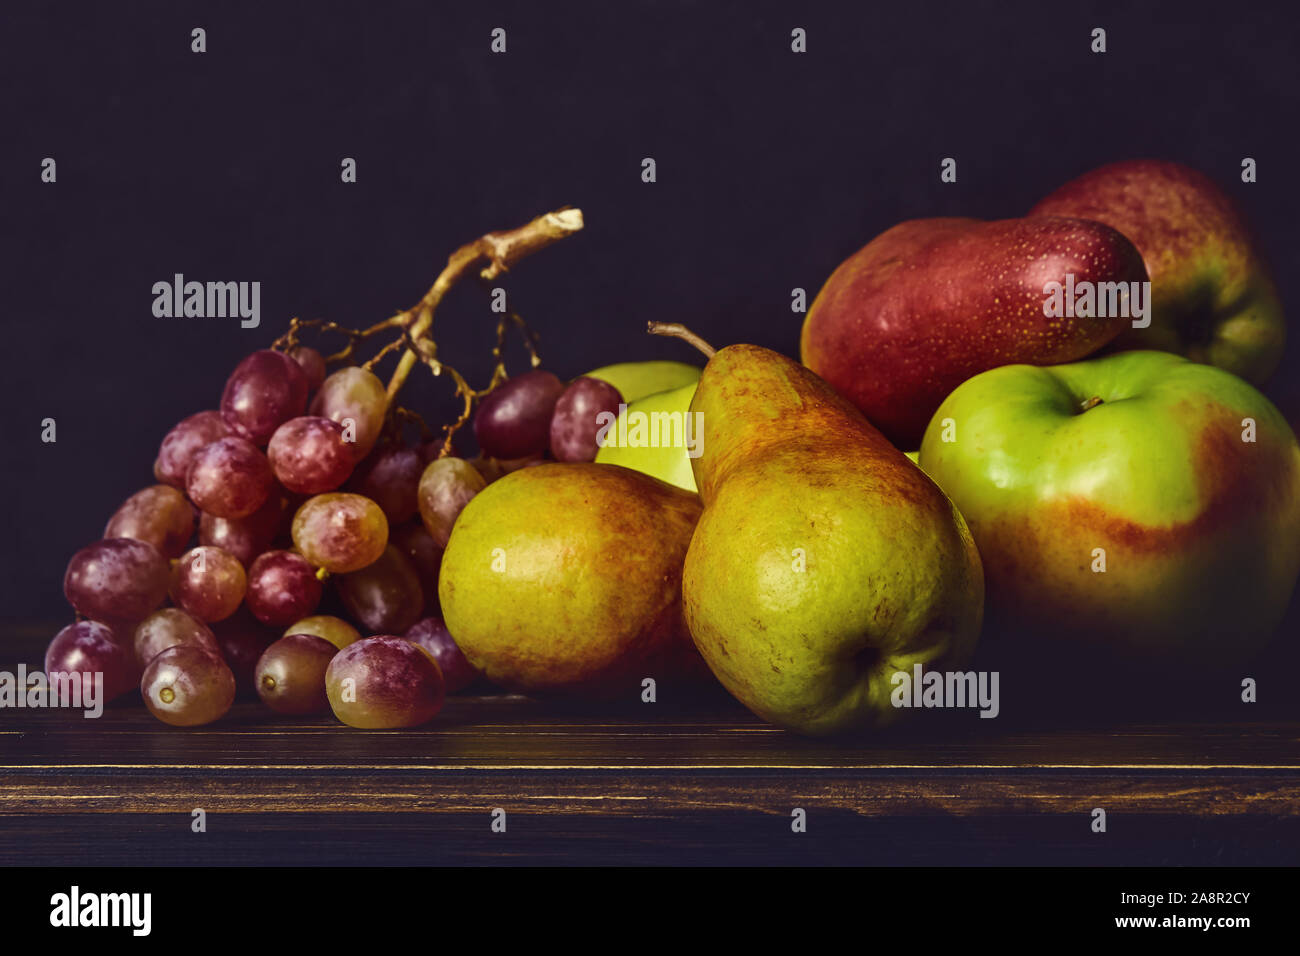 Ripe fruits, apples, pears grapes on a wooden old table and dark background. Fruit still life Stock Photo